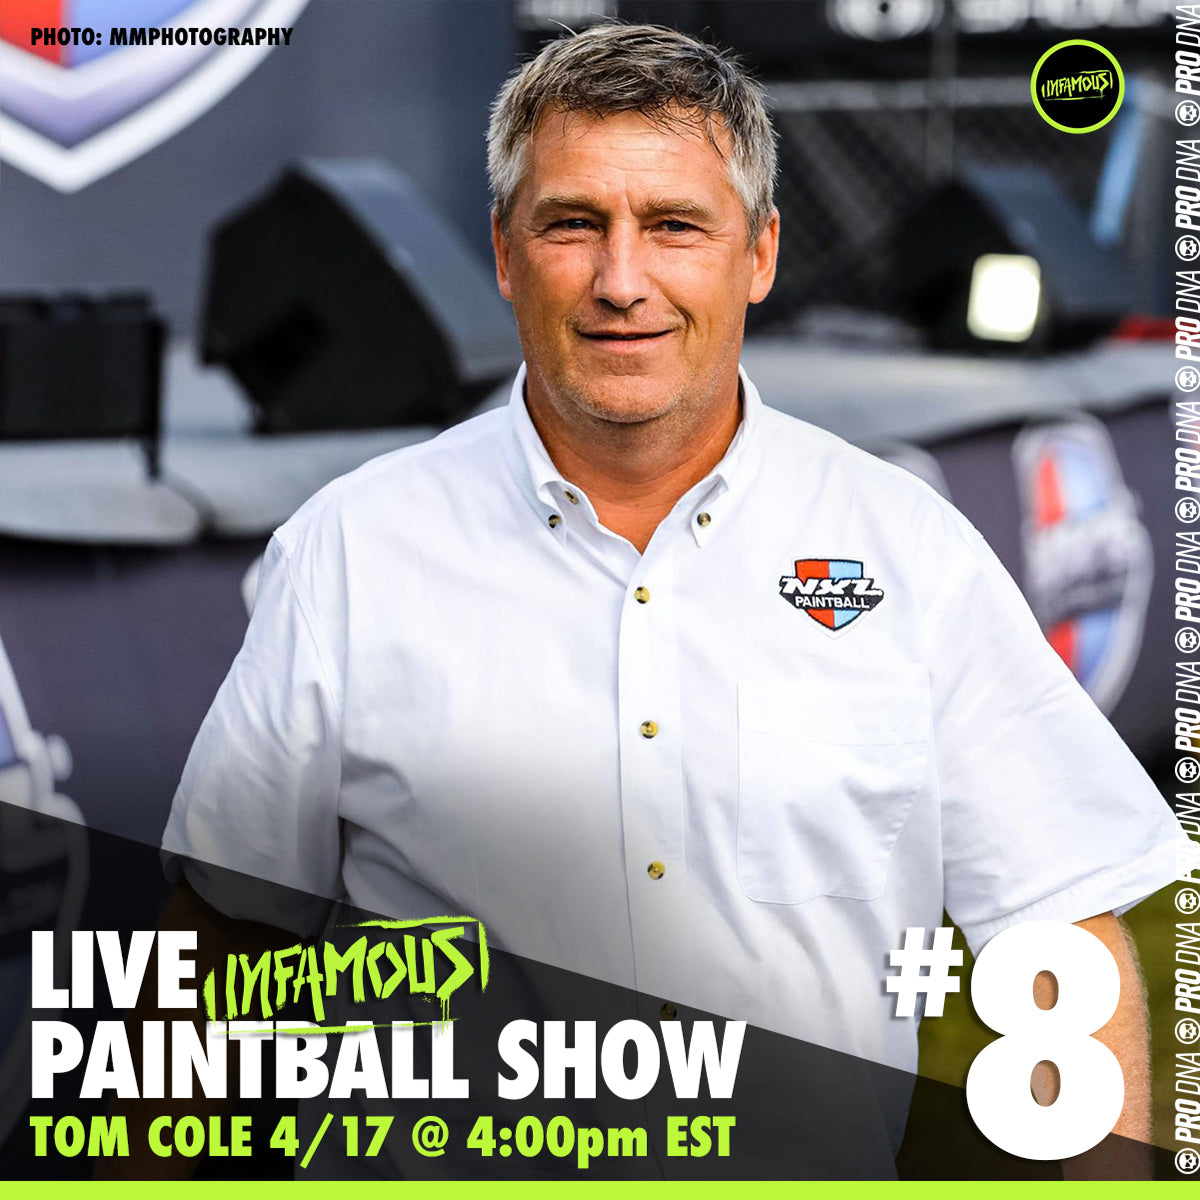 Infamous Paintball Live Show #8 - Tom Cole